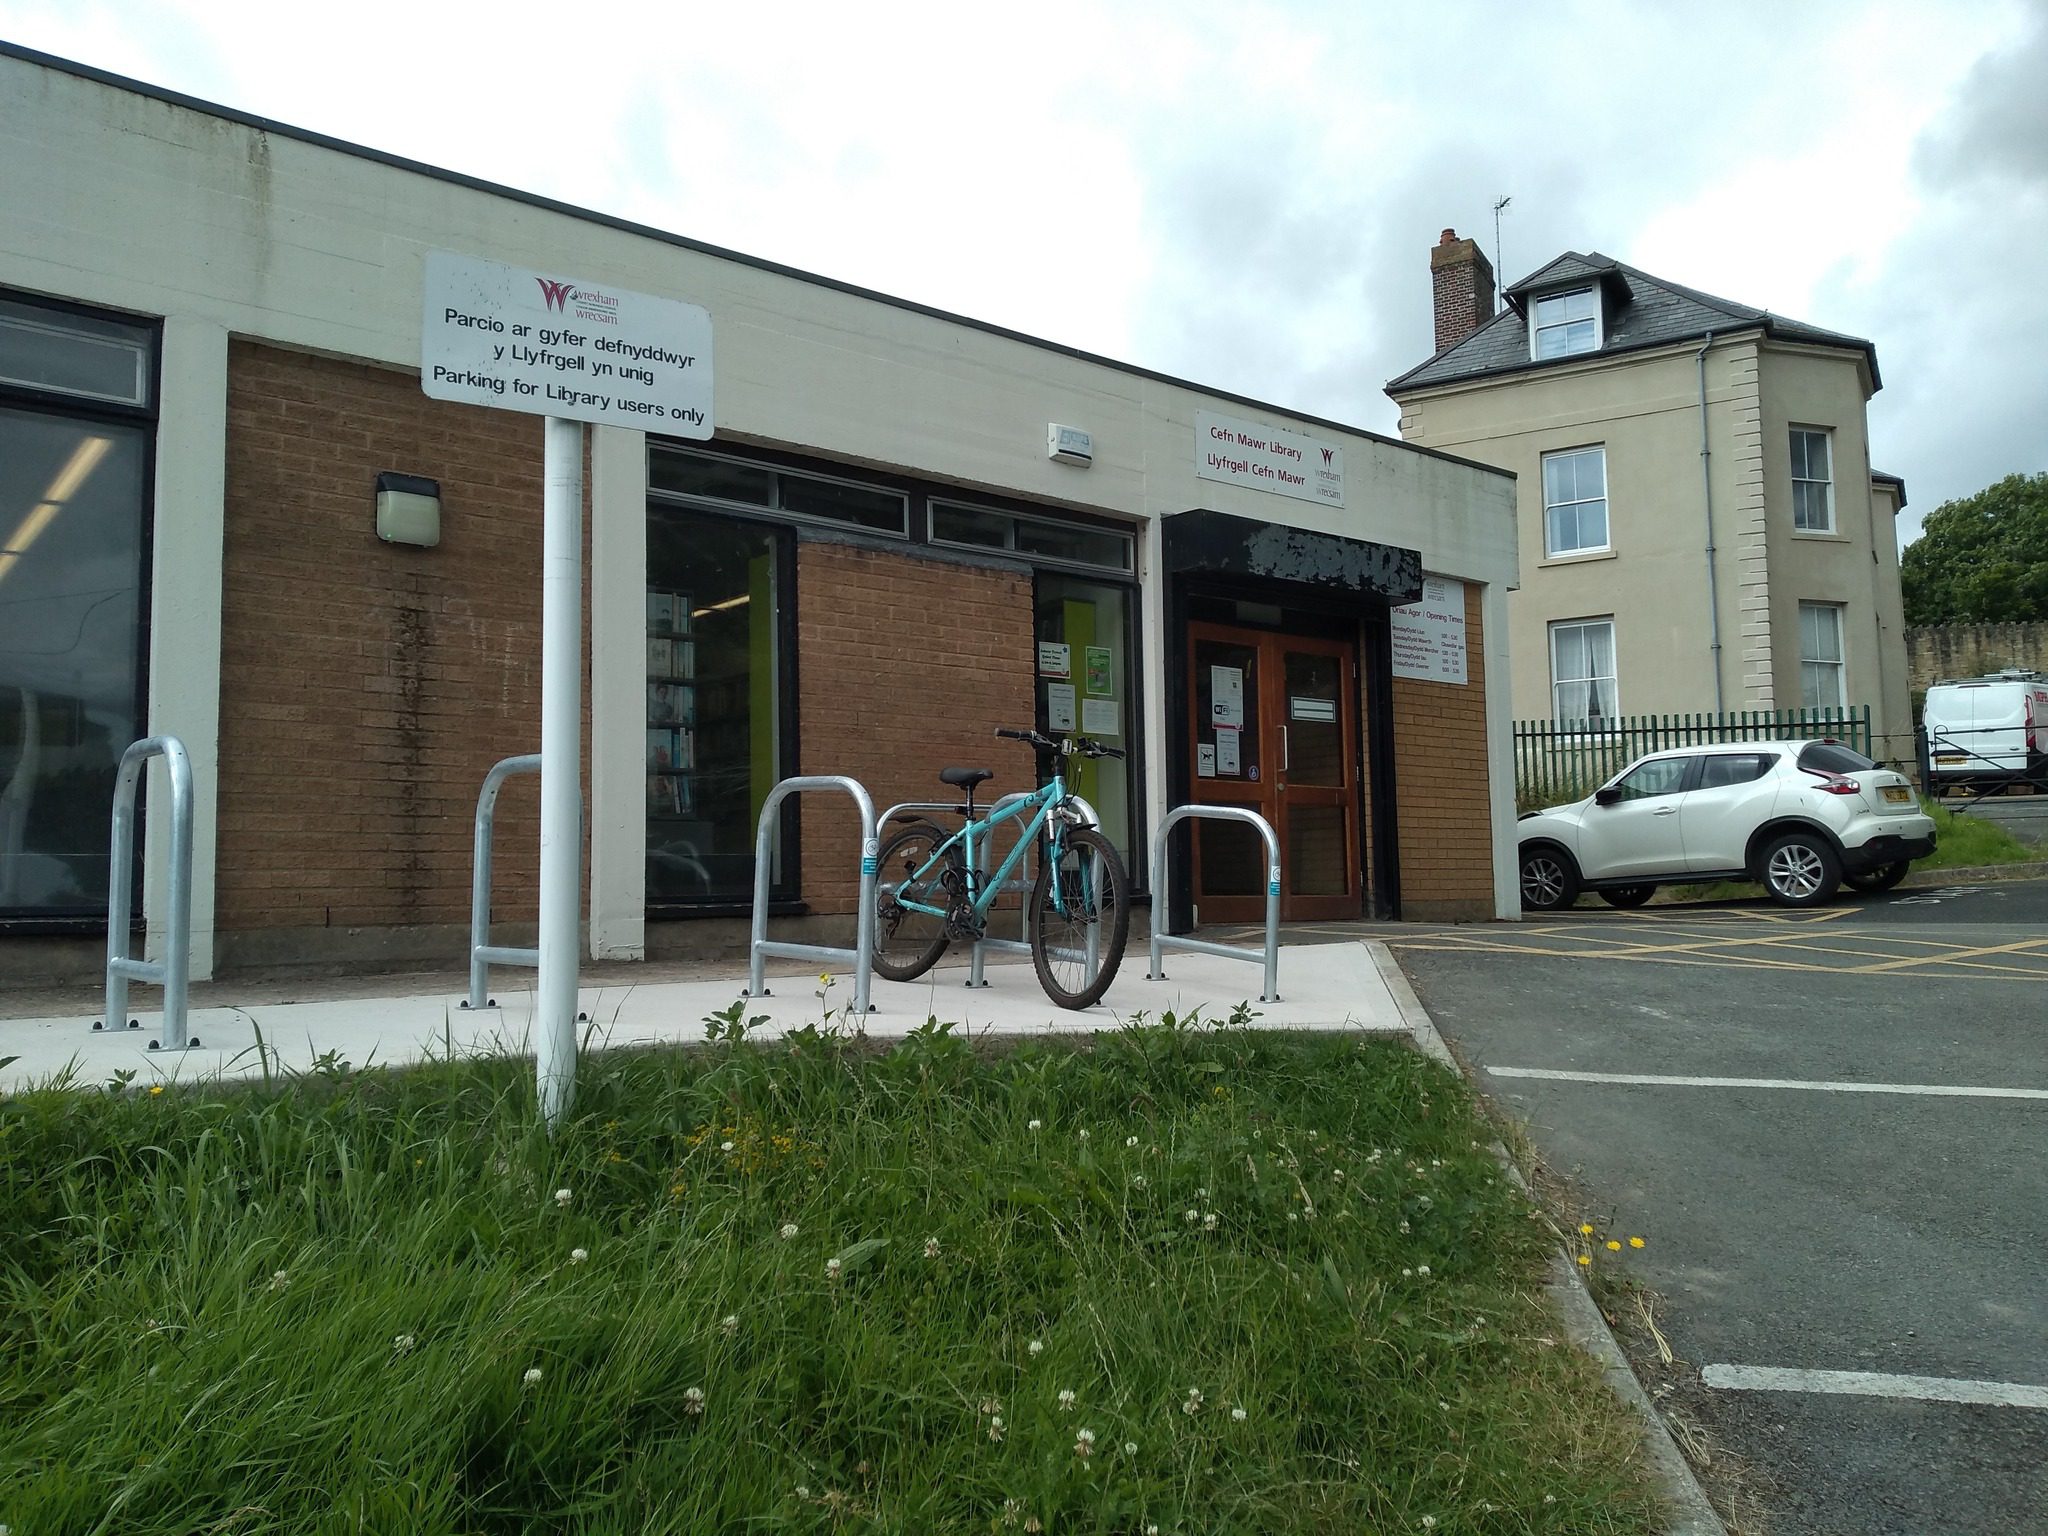 Cefn Mawr library bike and scooter racks